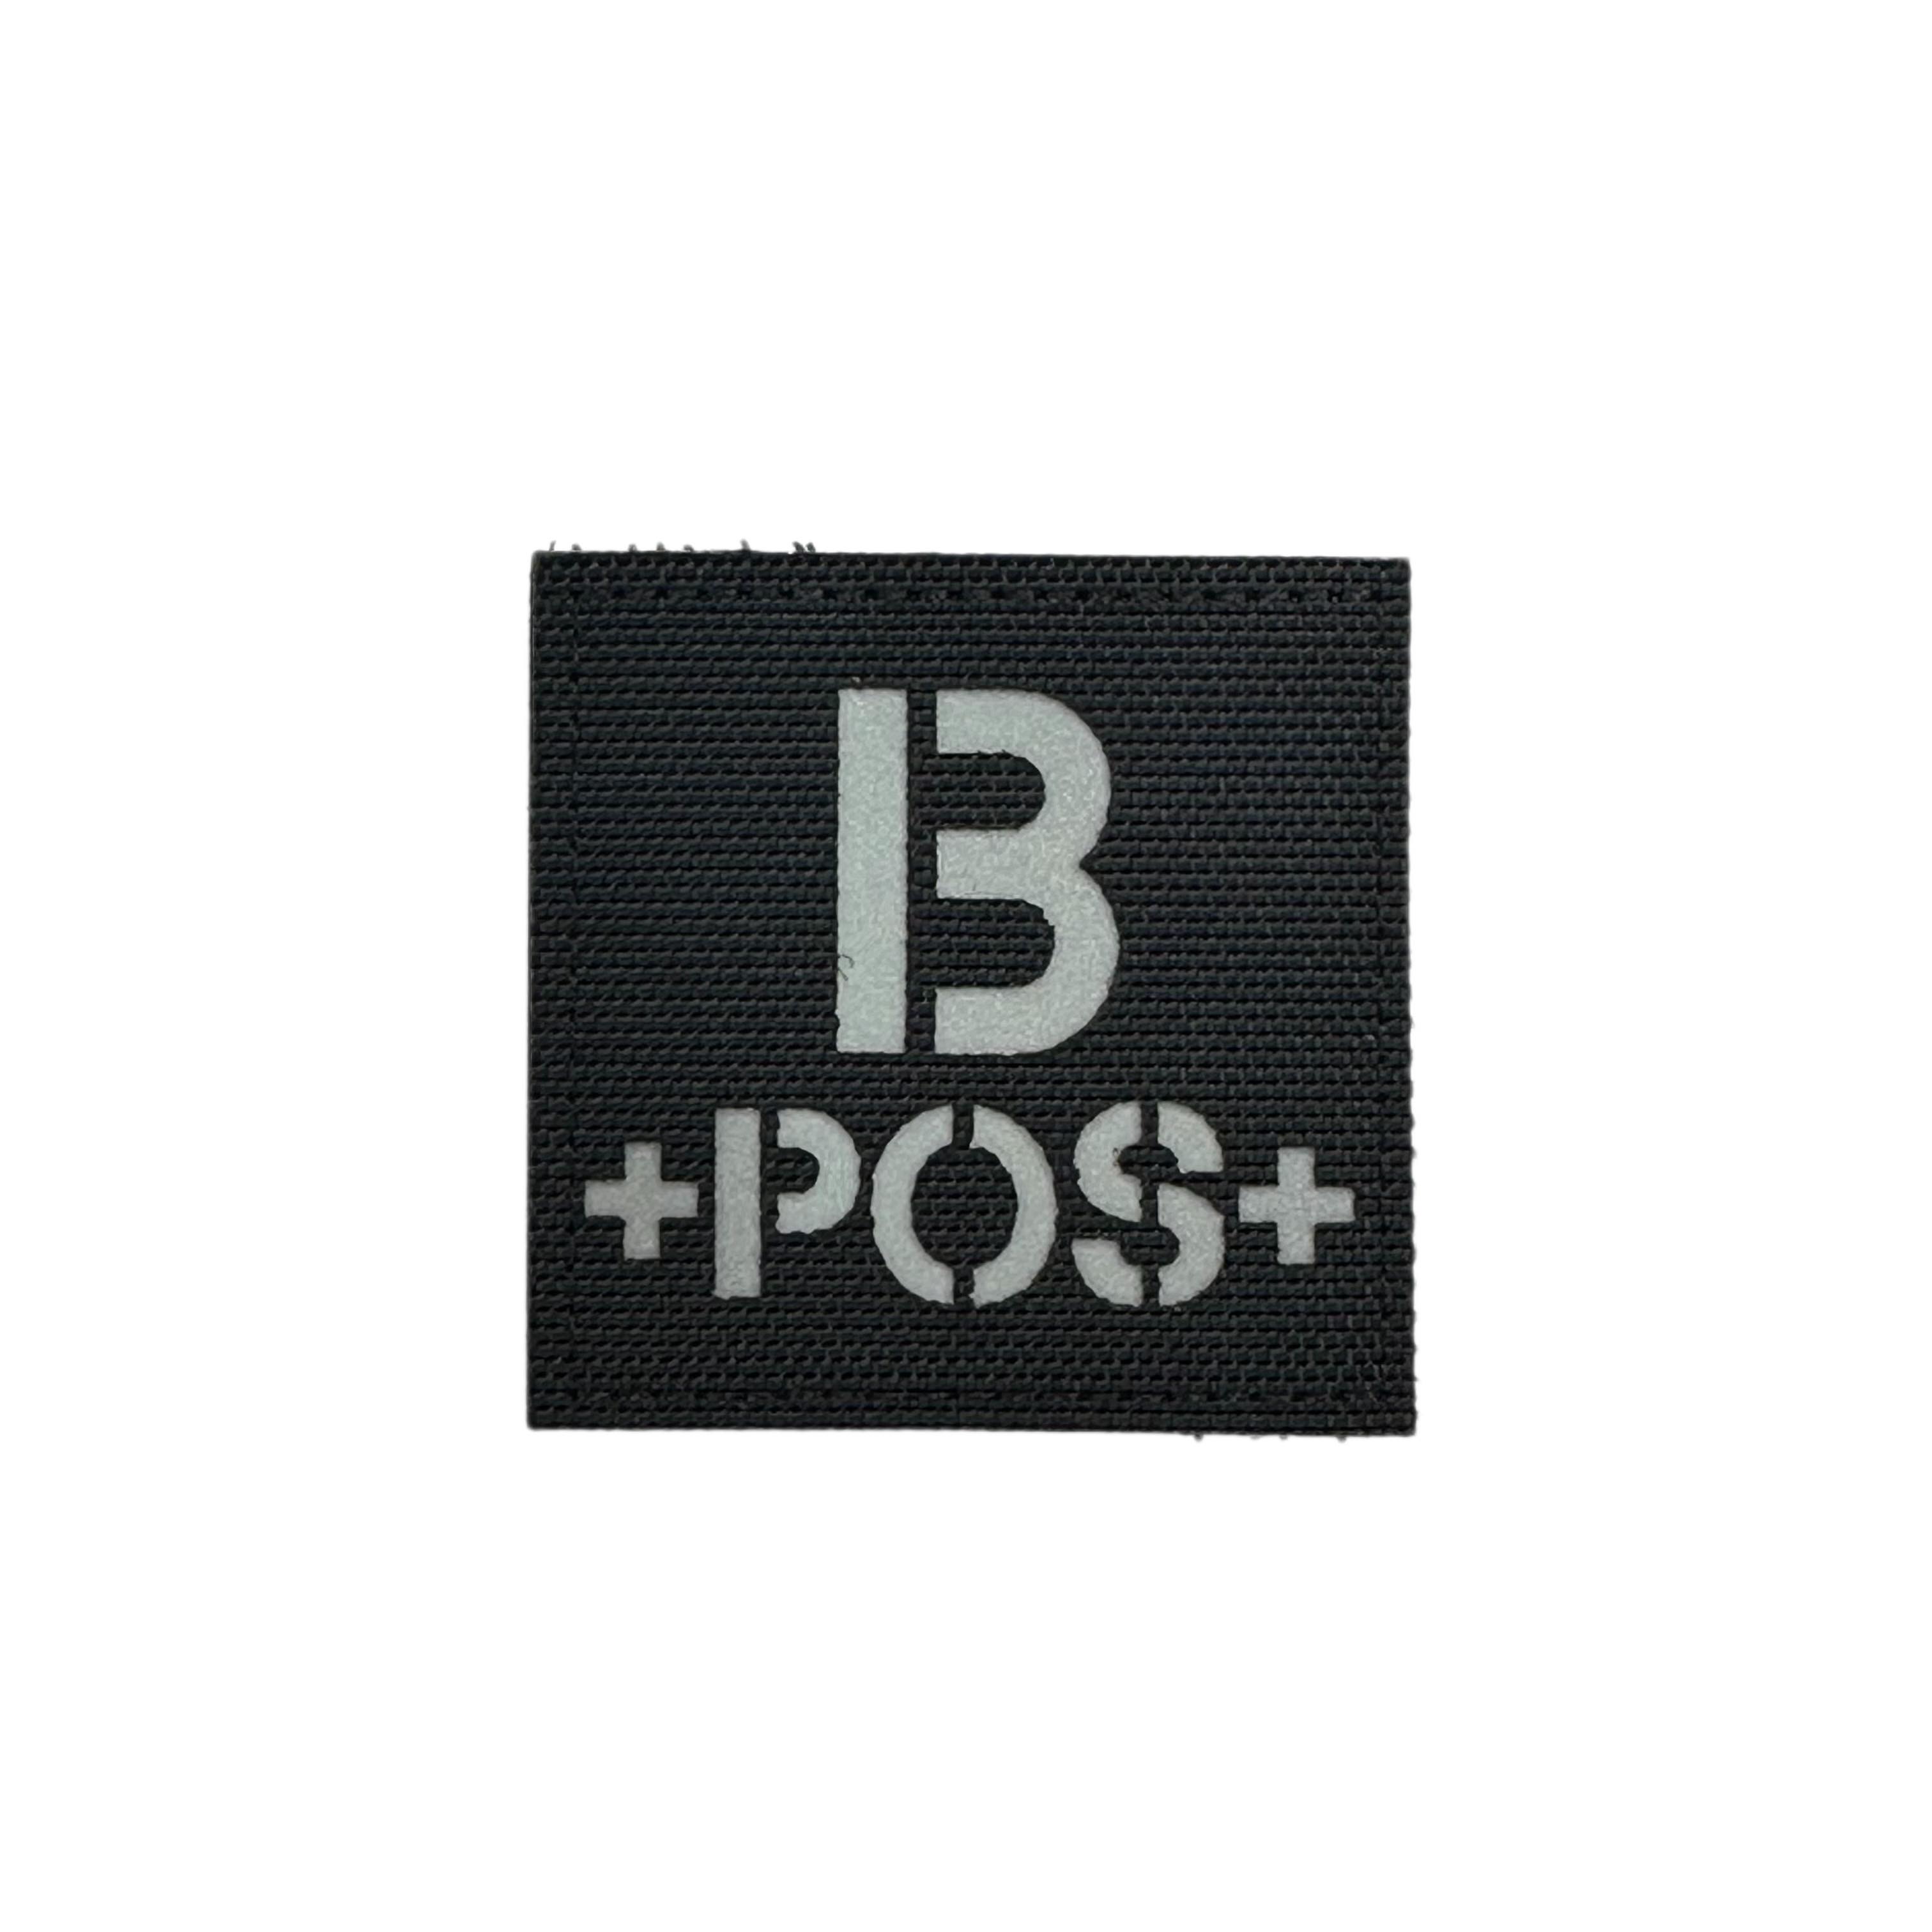 Laser Cut Patch - Square Reflective Bloodtype (B+)